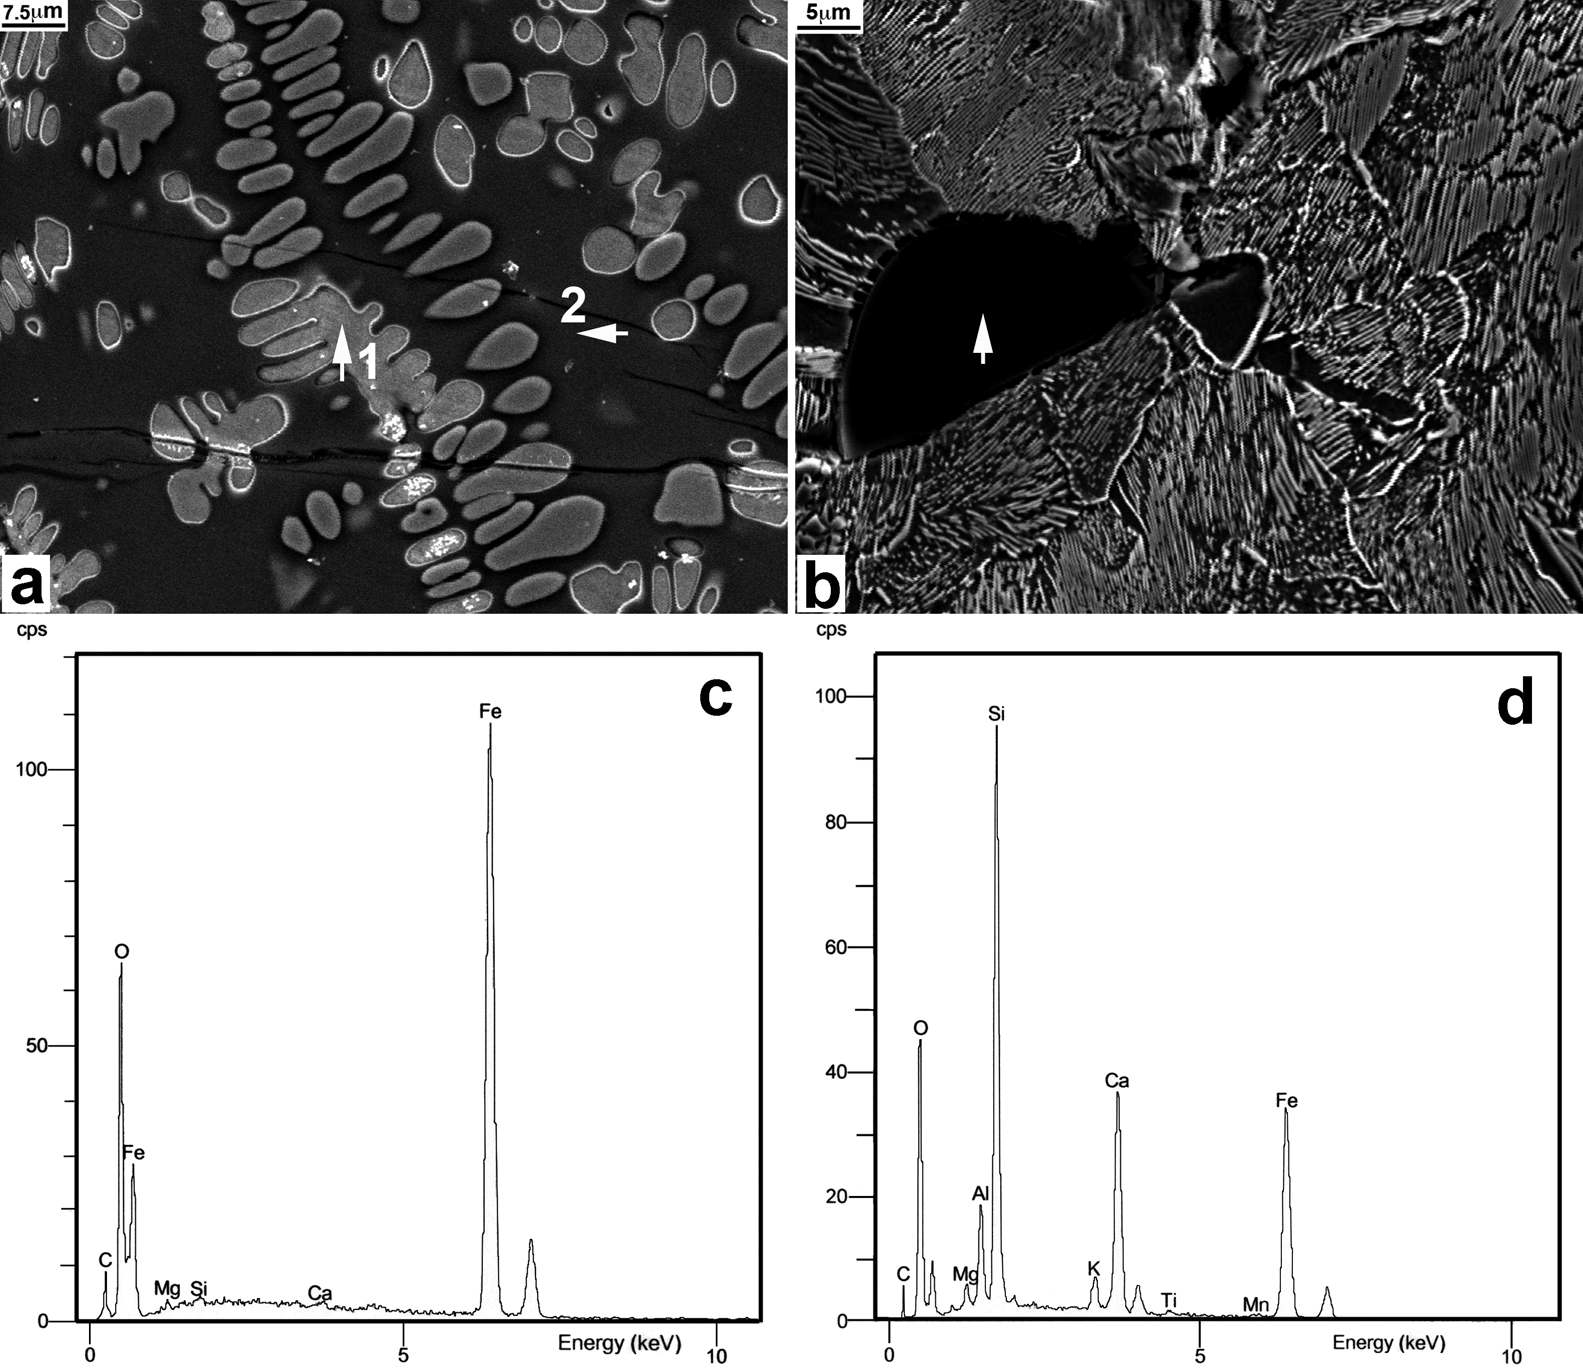 SEM micrographs and EDS spectra. (a), (b) SEM micrographs at 1,500x and 2,000x magnification, showing details of the areas marked by arrow 1 and 2 in Fig. 3d, respectively; (c), (d) EDS spectra taken from the spots at arrow 1 and 2 in Fig. 4a, respectively.